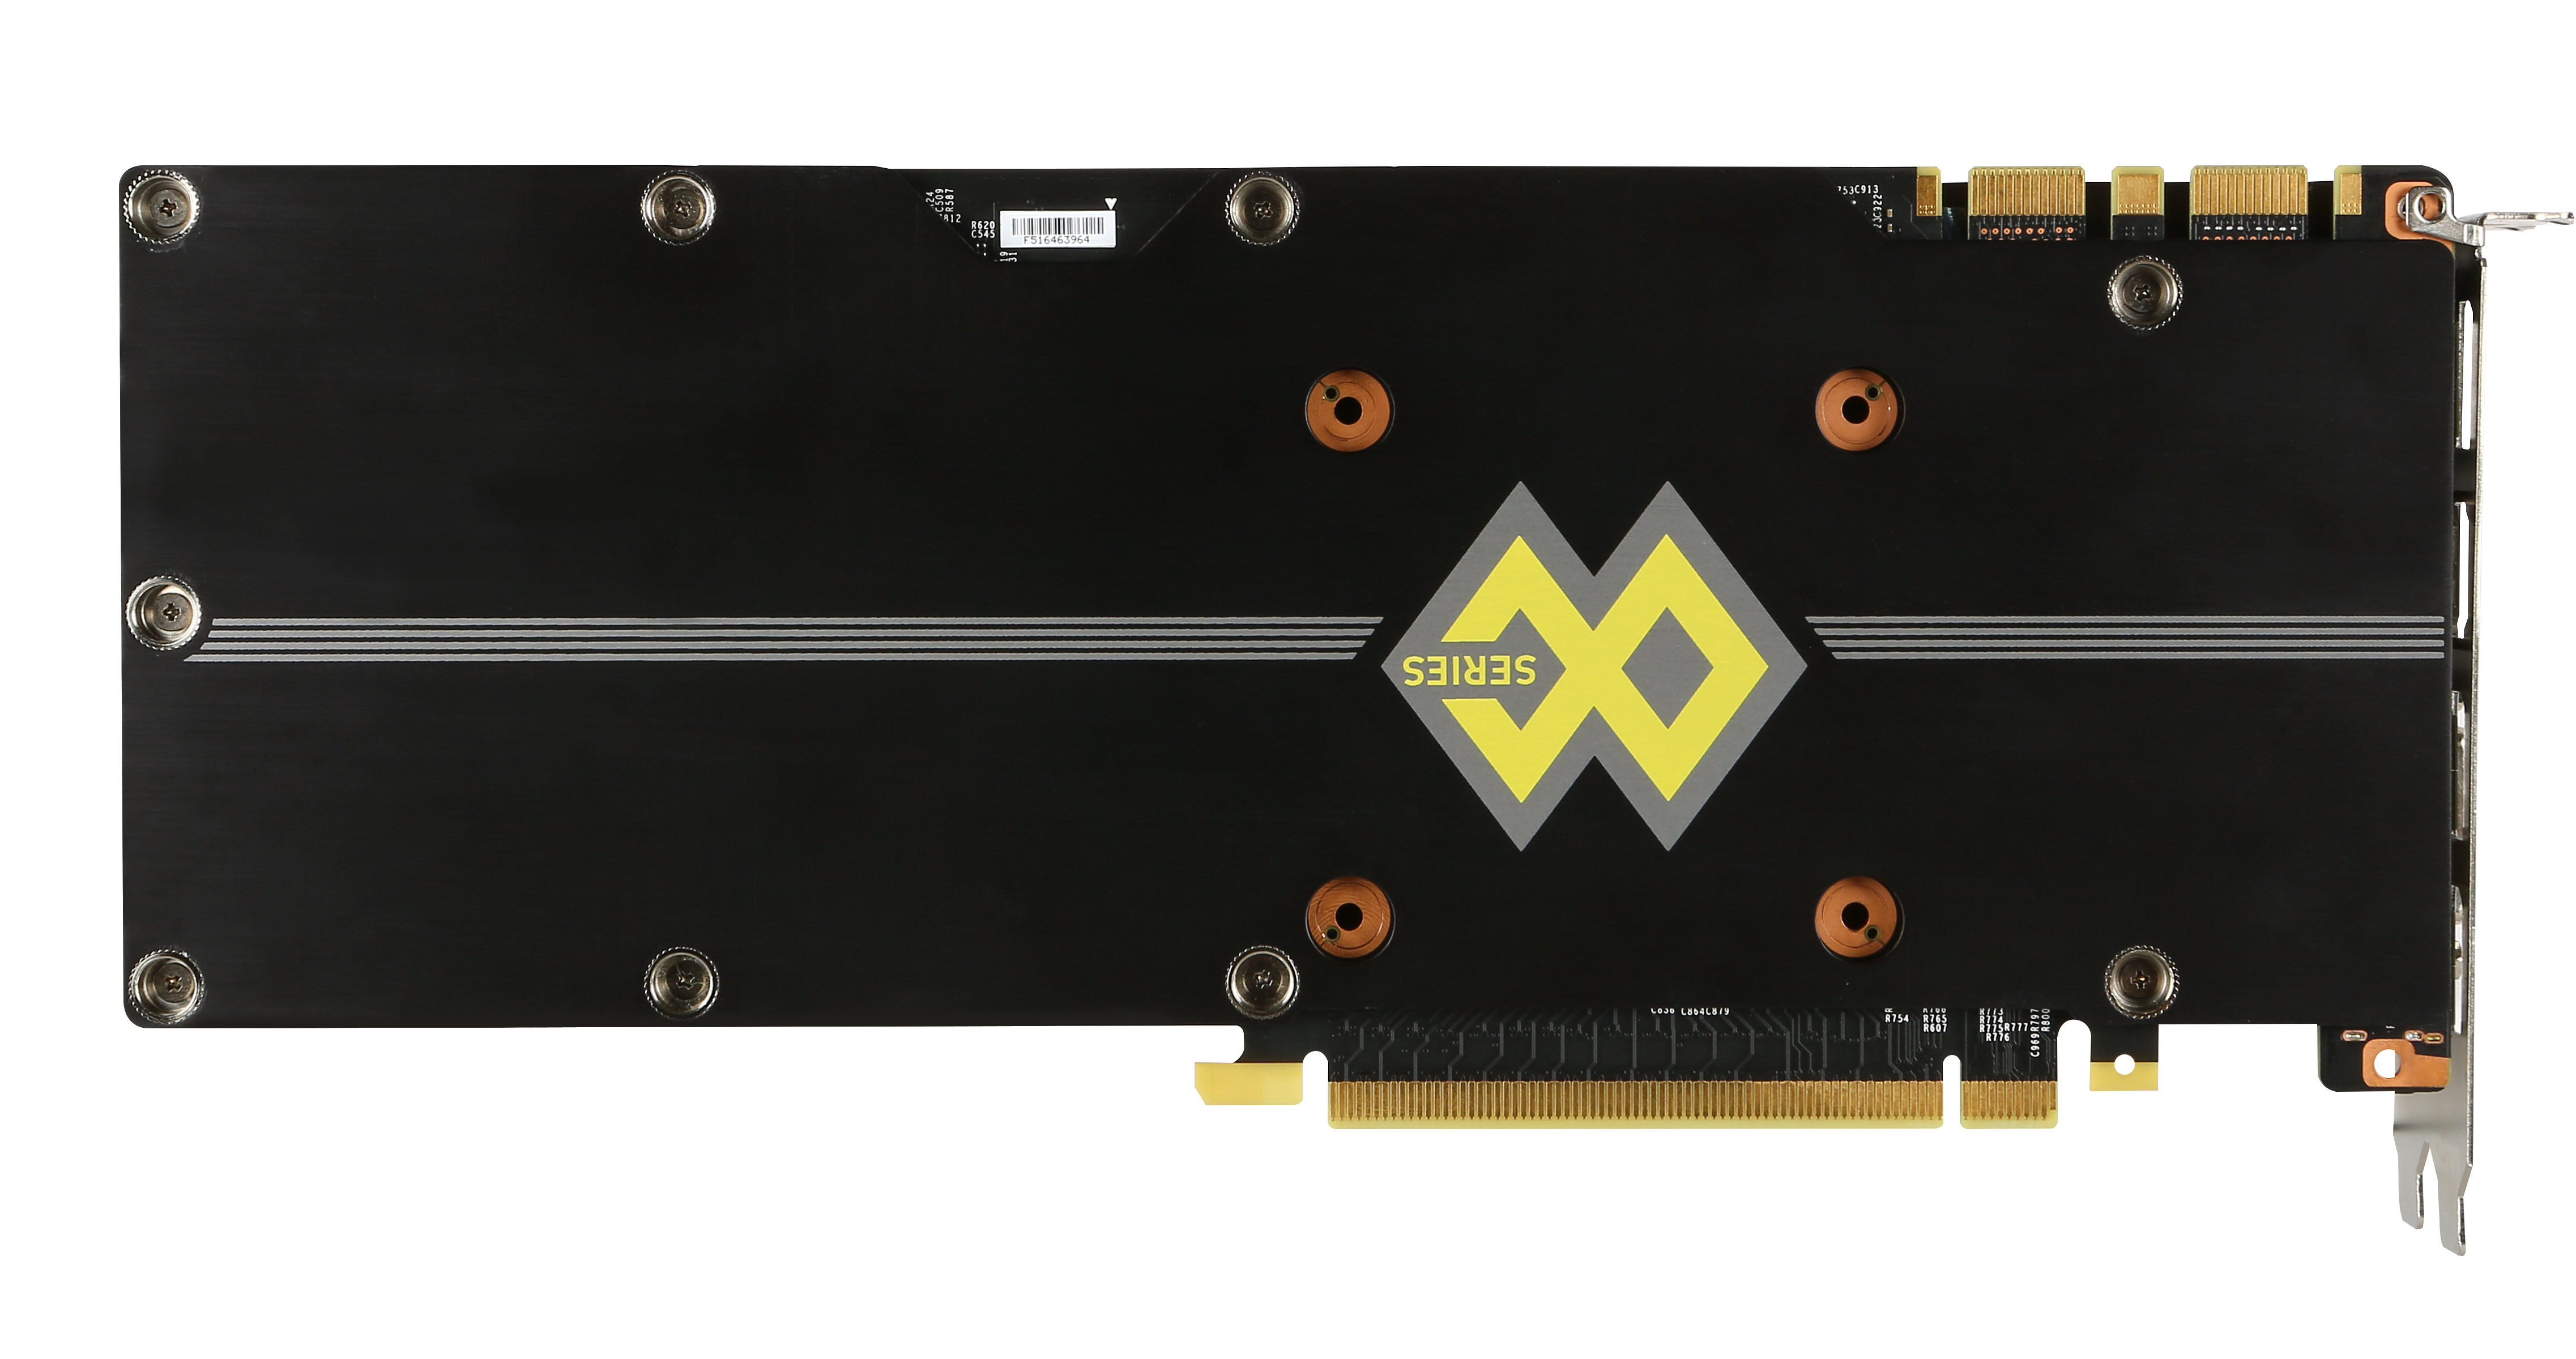 msi-gtx_980ti_sea_hawk-product_picture-2d3.png